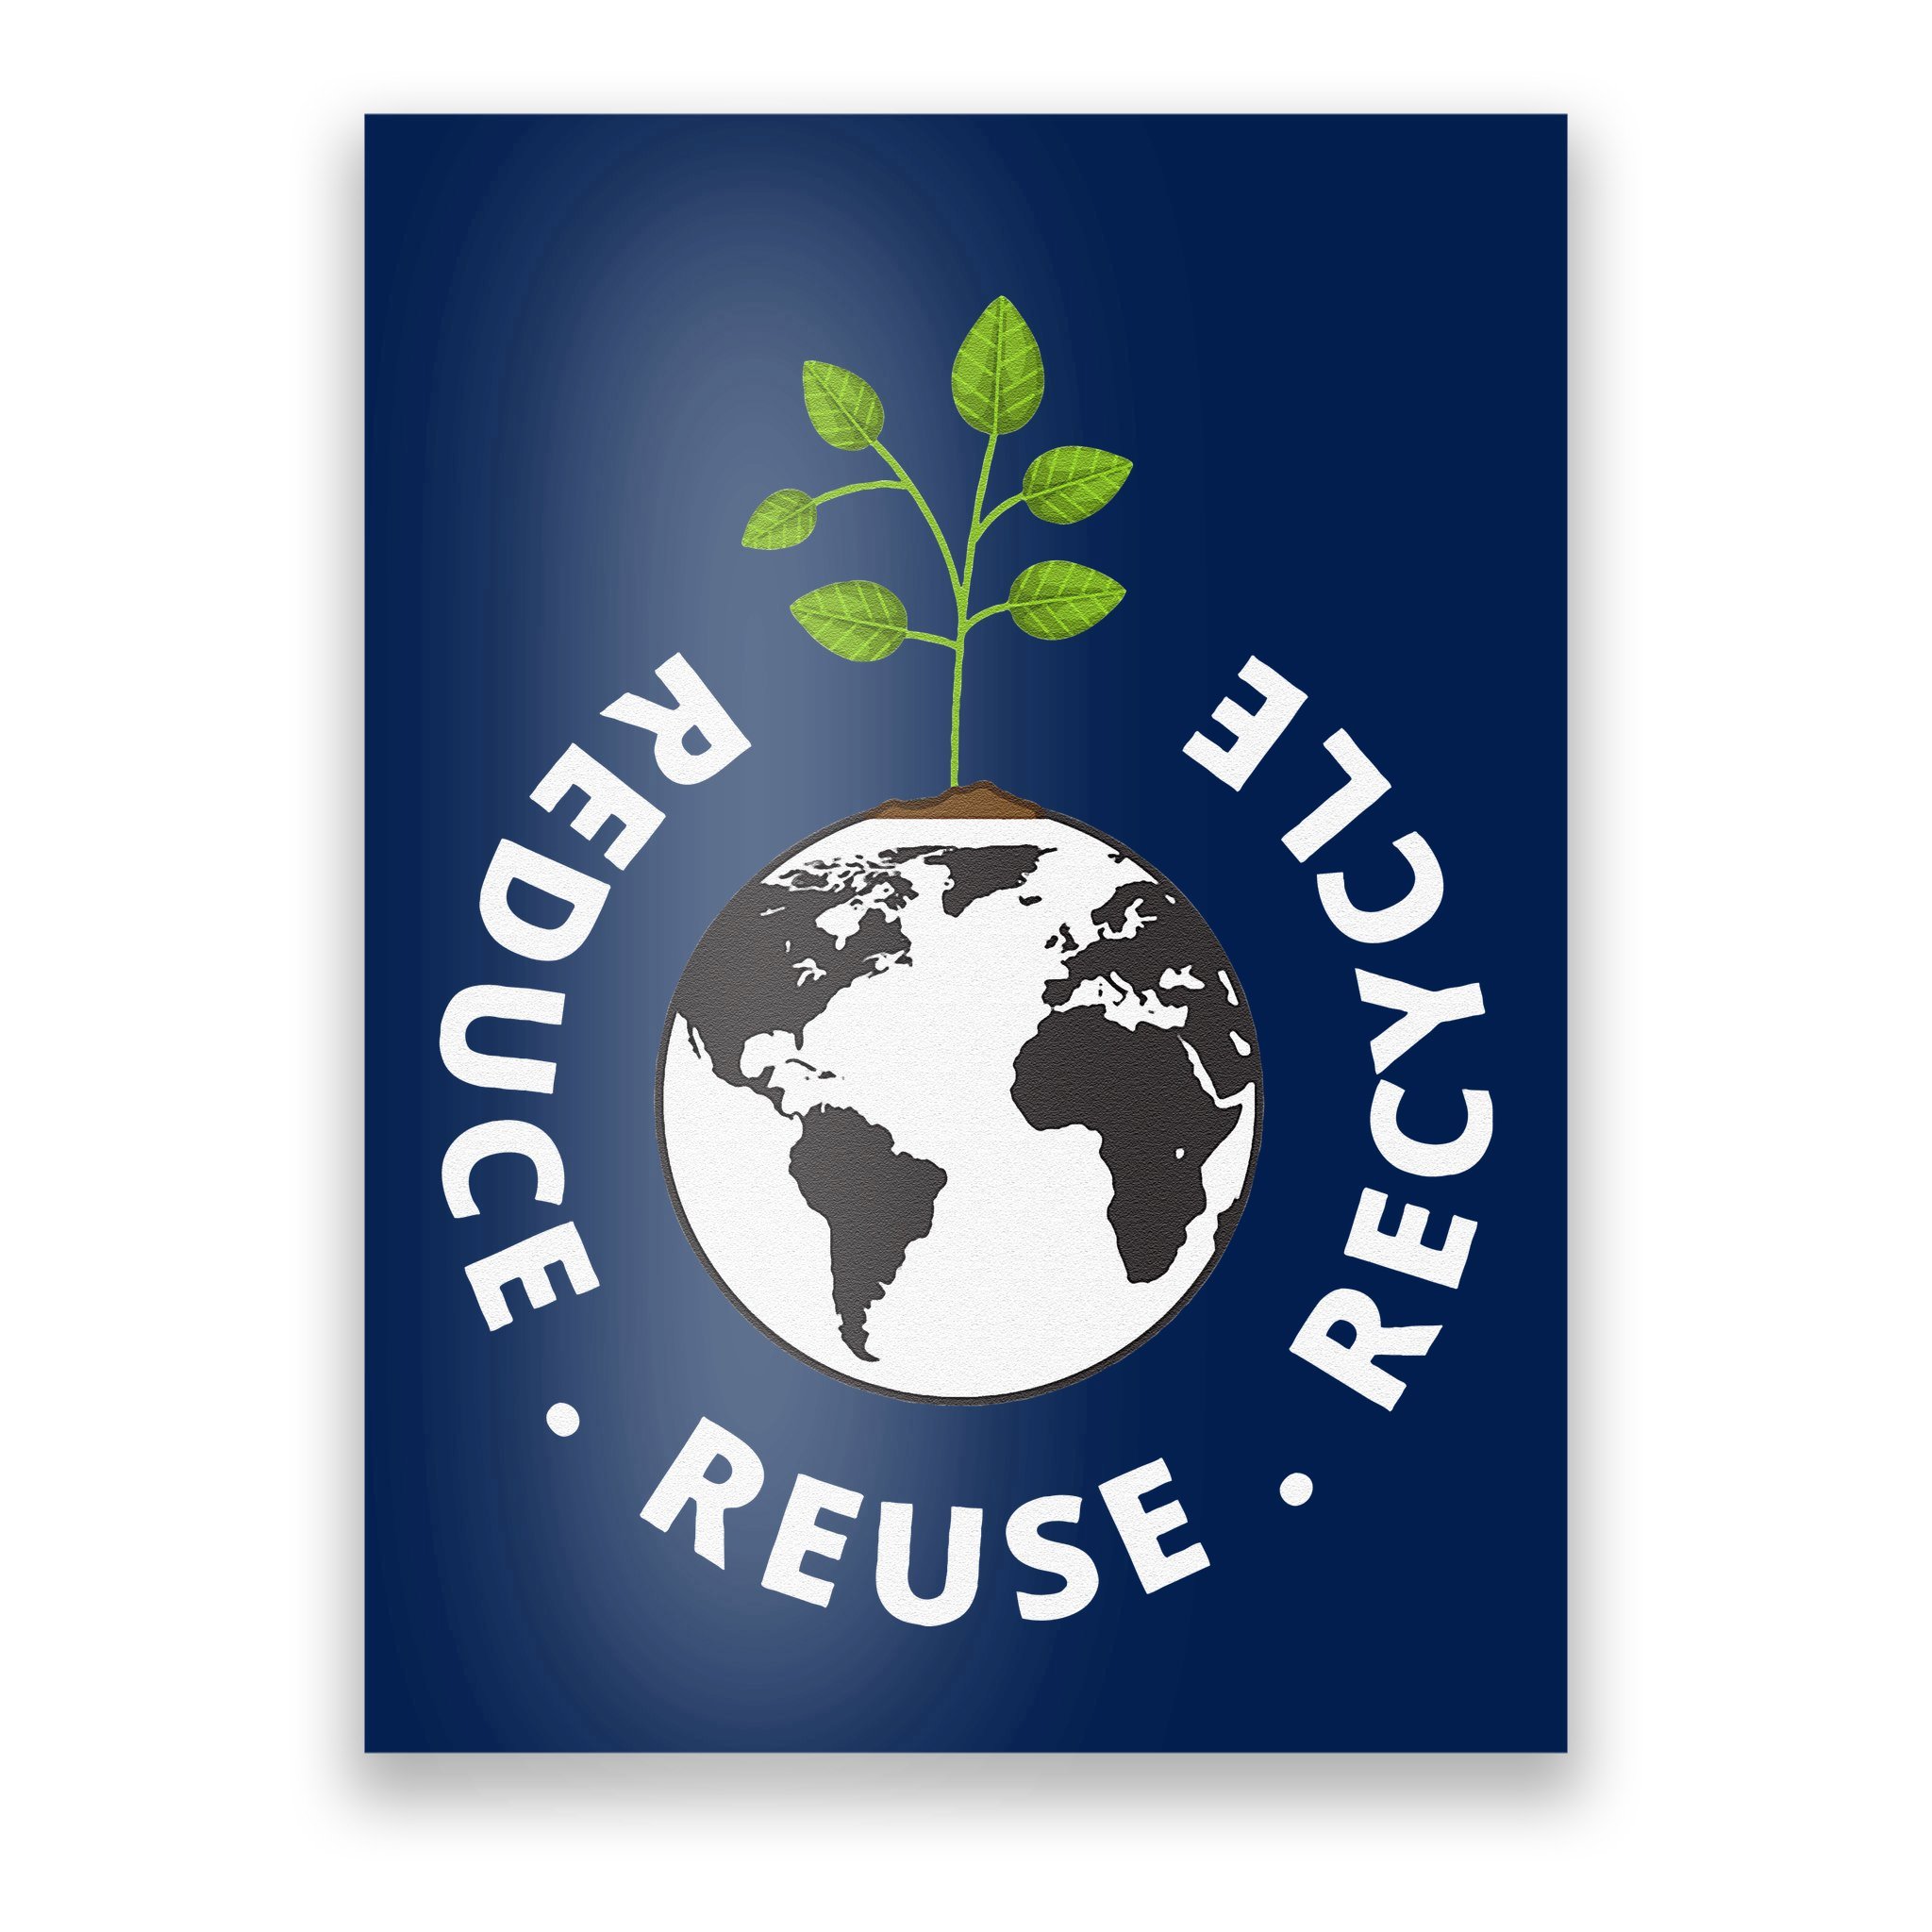 Reuse, Reduce, Recycle: Join the Worldwide Campaign! | Eco Trade Company